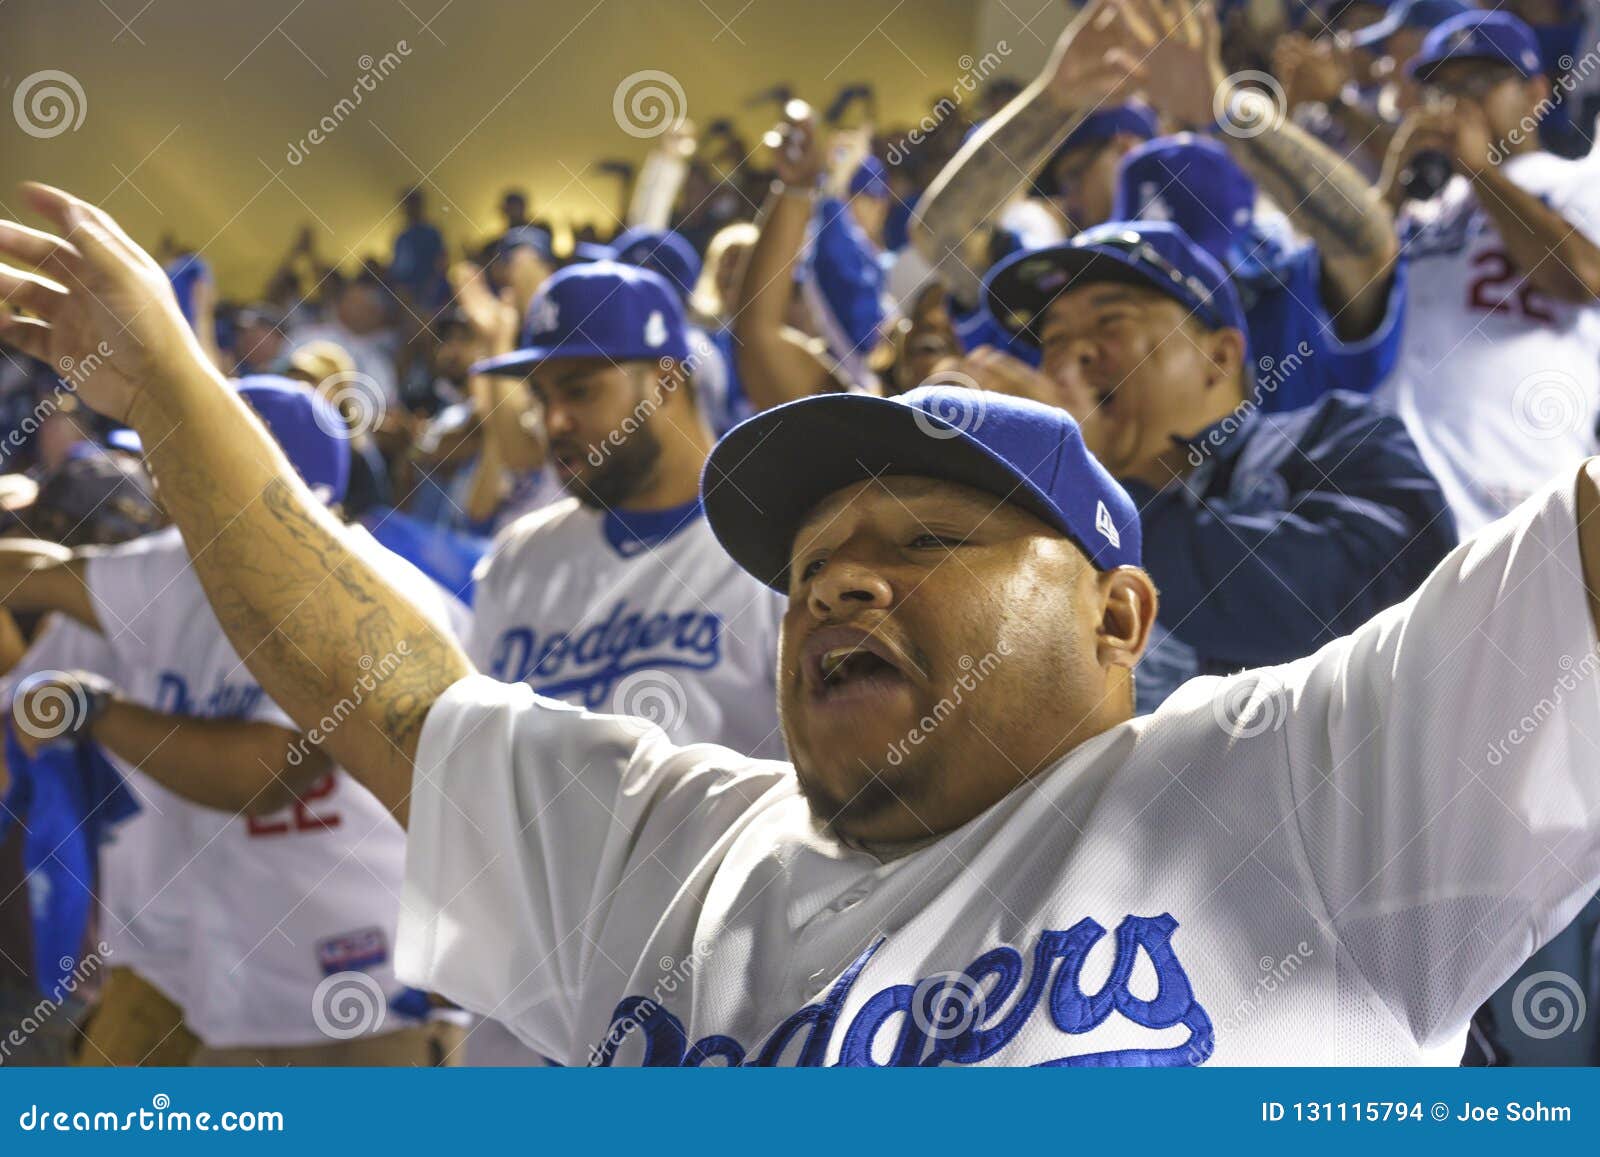 OCTOBER 26, 2018 - LOS ANGELES, CALIFORNIA, USA - DODGER STADIUM Fans Celebrate As LA Dodgers Defeat Boston Red Sox 3-2 in Game 3 Editorial Stock Image